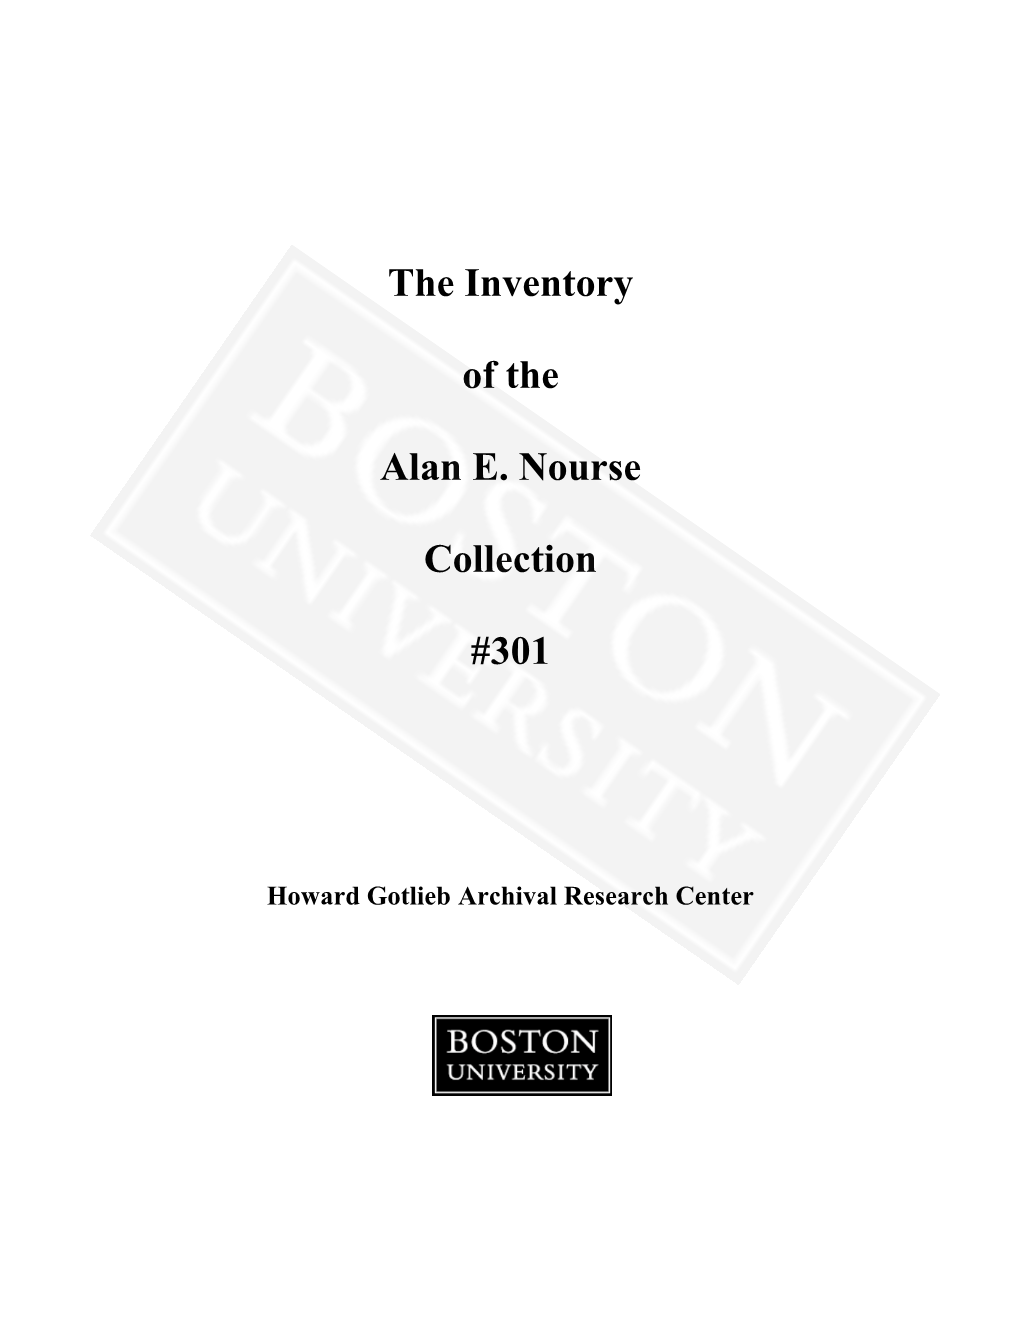 The Inventory of the Alan E. Nourse Collection #301